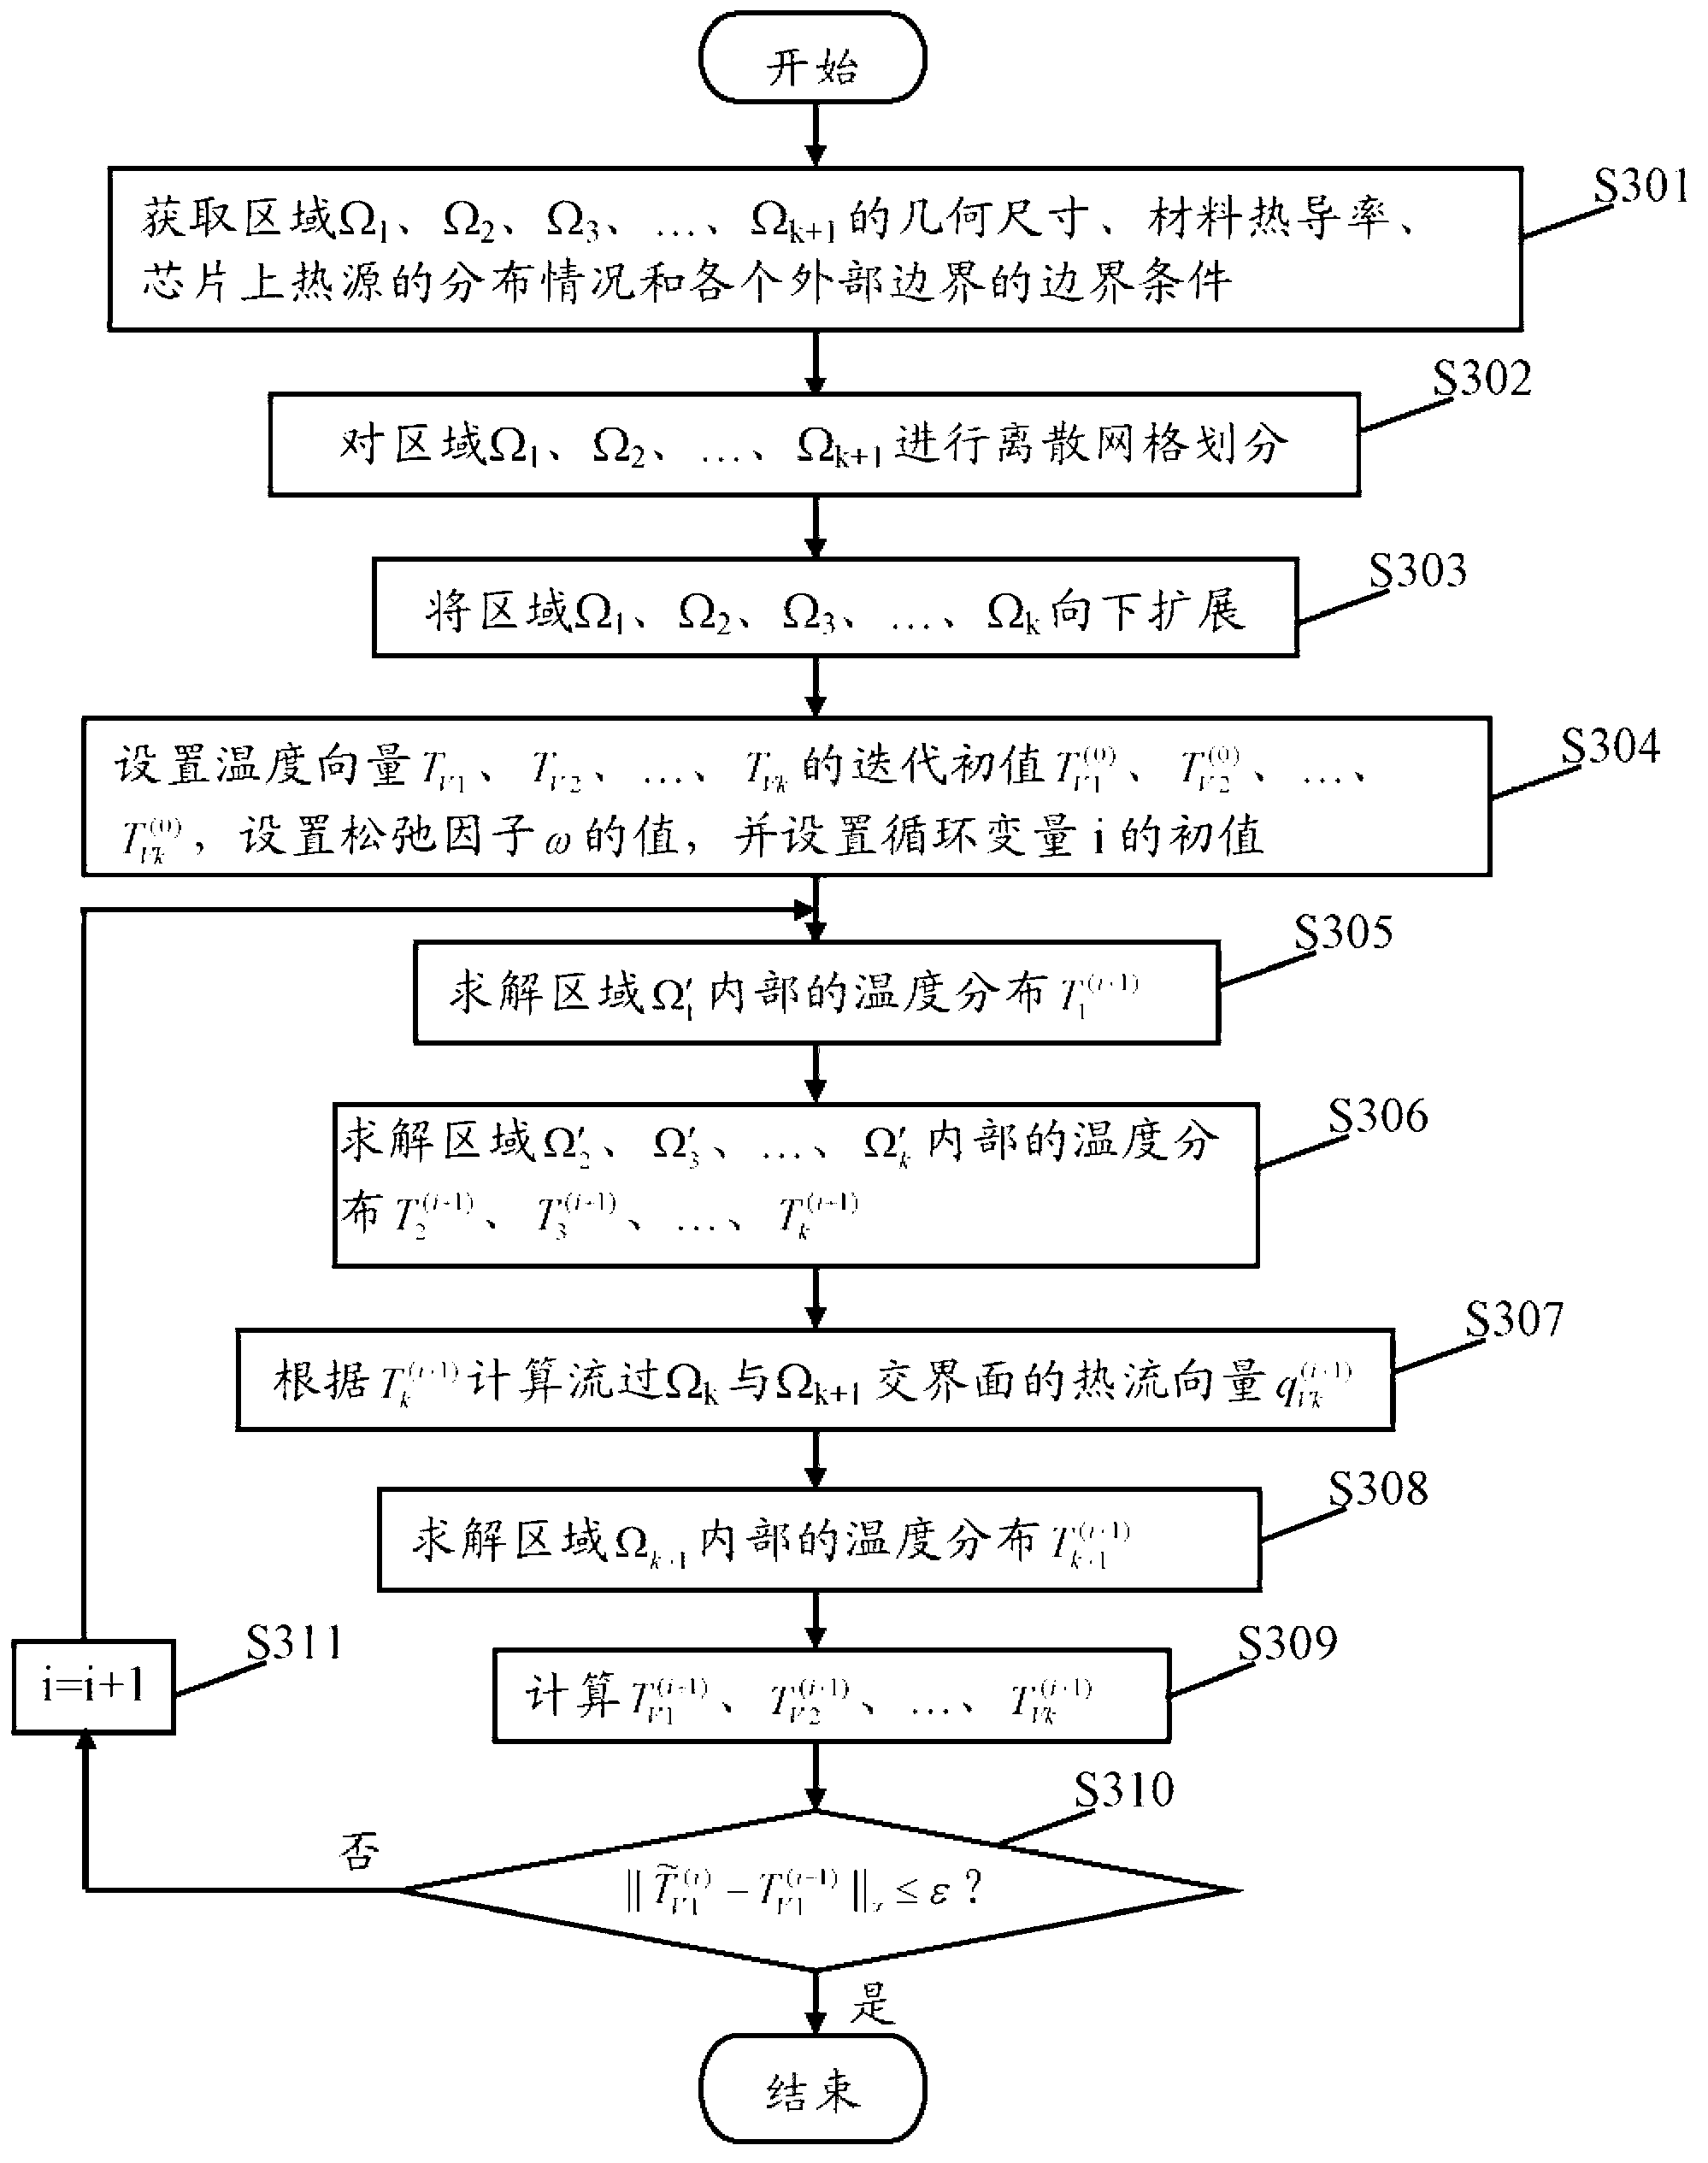 Chip thermal analysis method based on three-dimensional domain decomposition